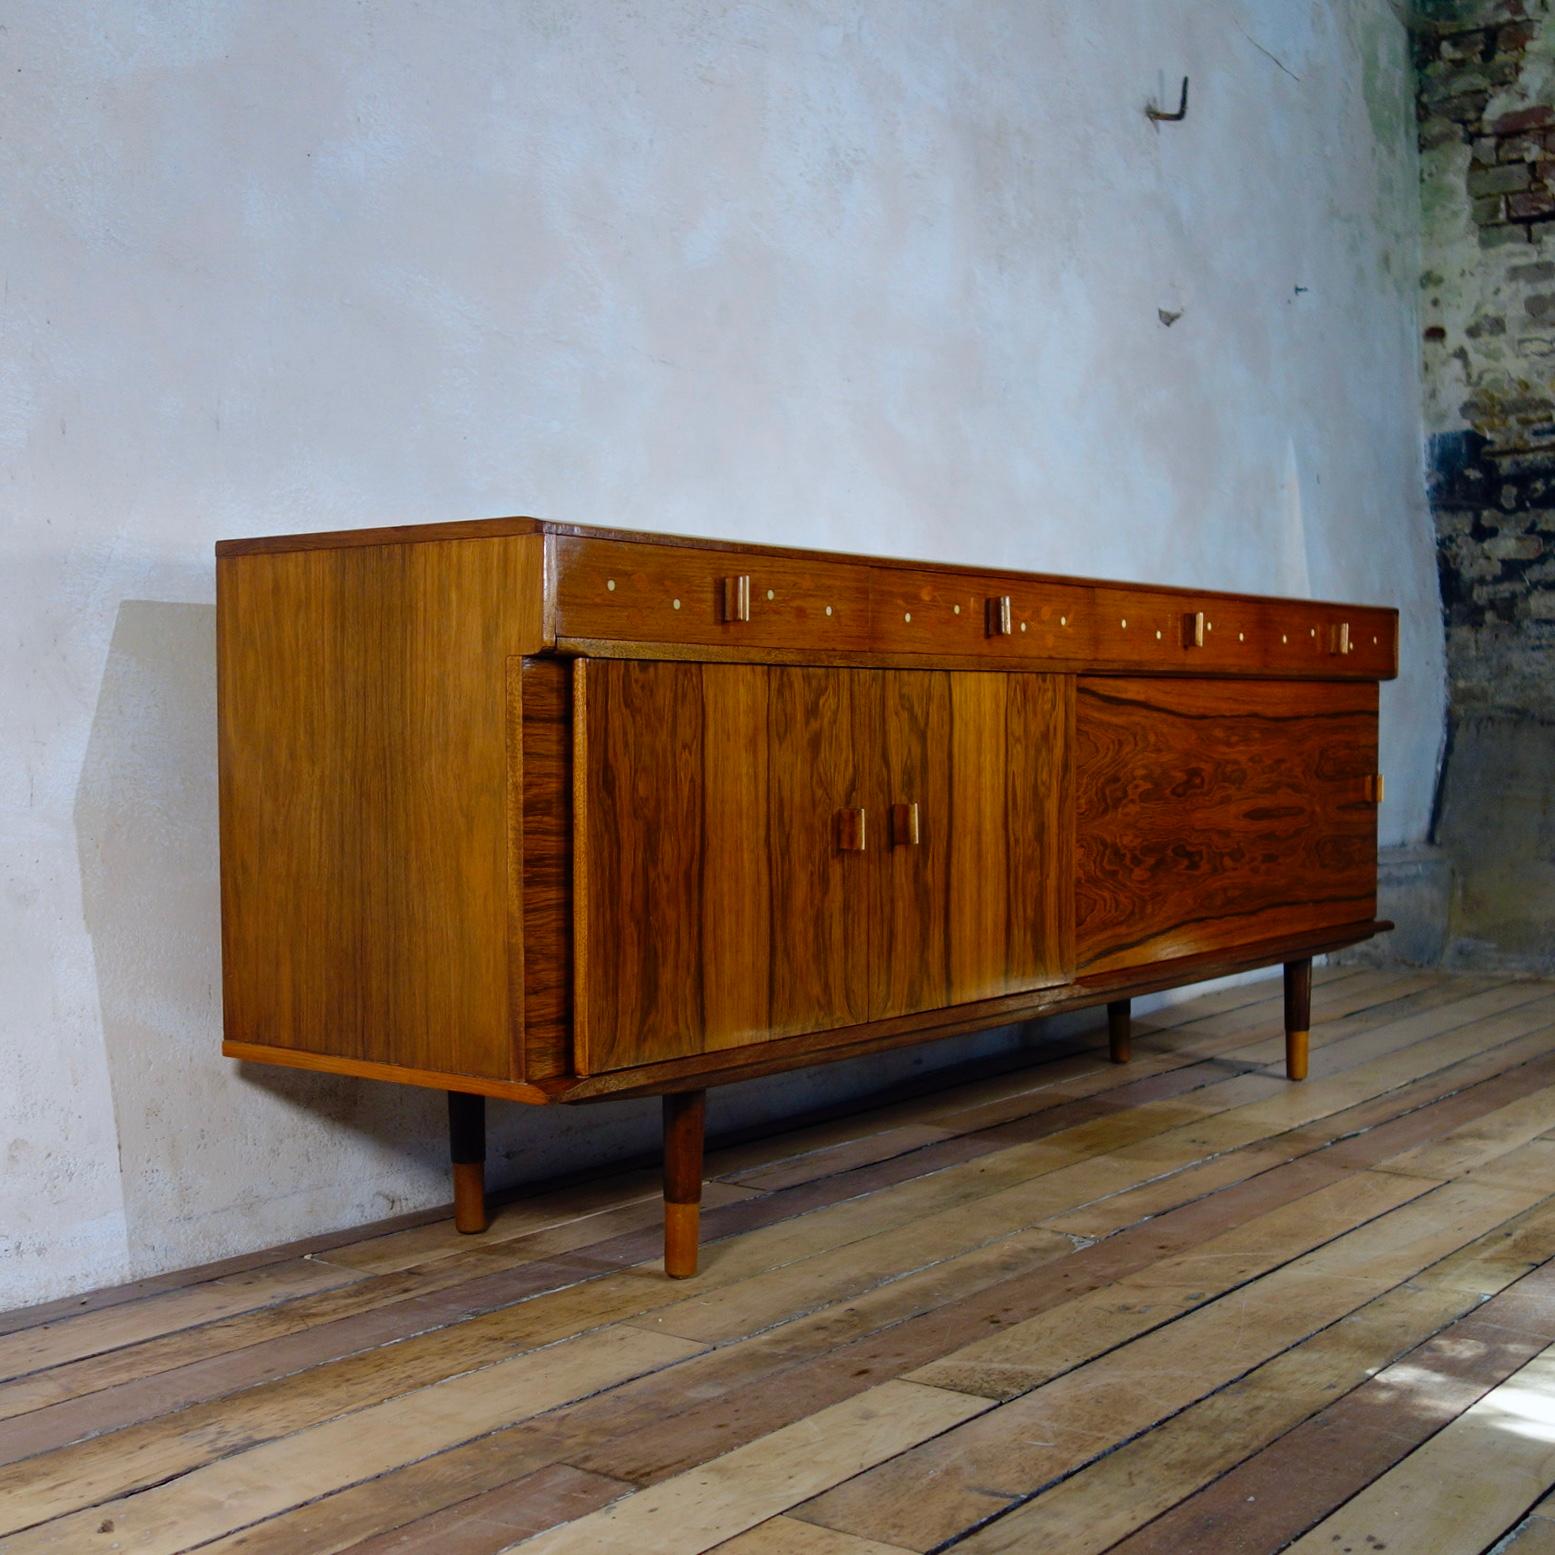 A Brazilian rosewood and inlaid sideboard/credenza.
Featuring four frieze drawers all of which have been subtly inlaid with repetitive mistletoe decoration. The far left-hand side drawer is lined with green felt and sectioned into four equal sized